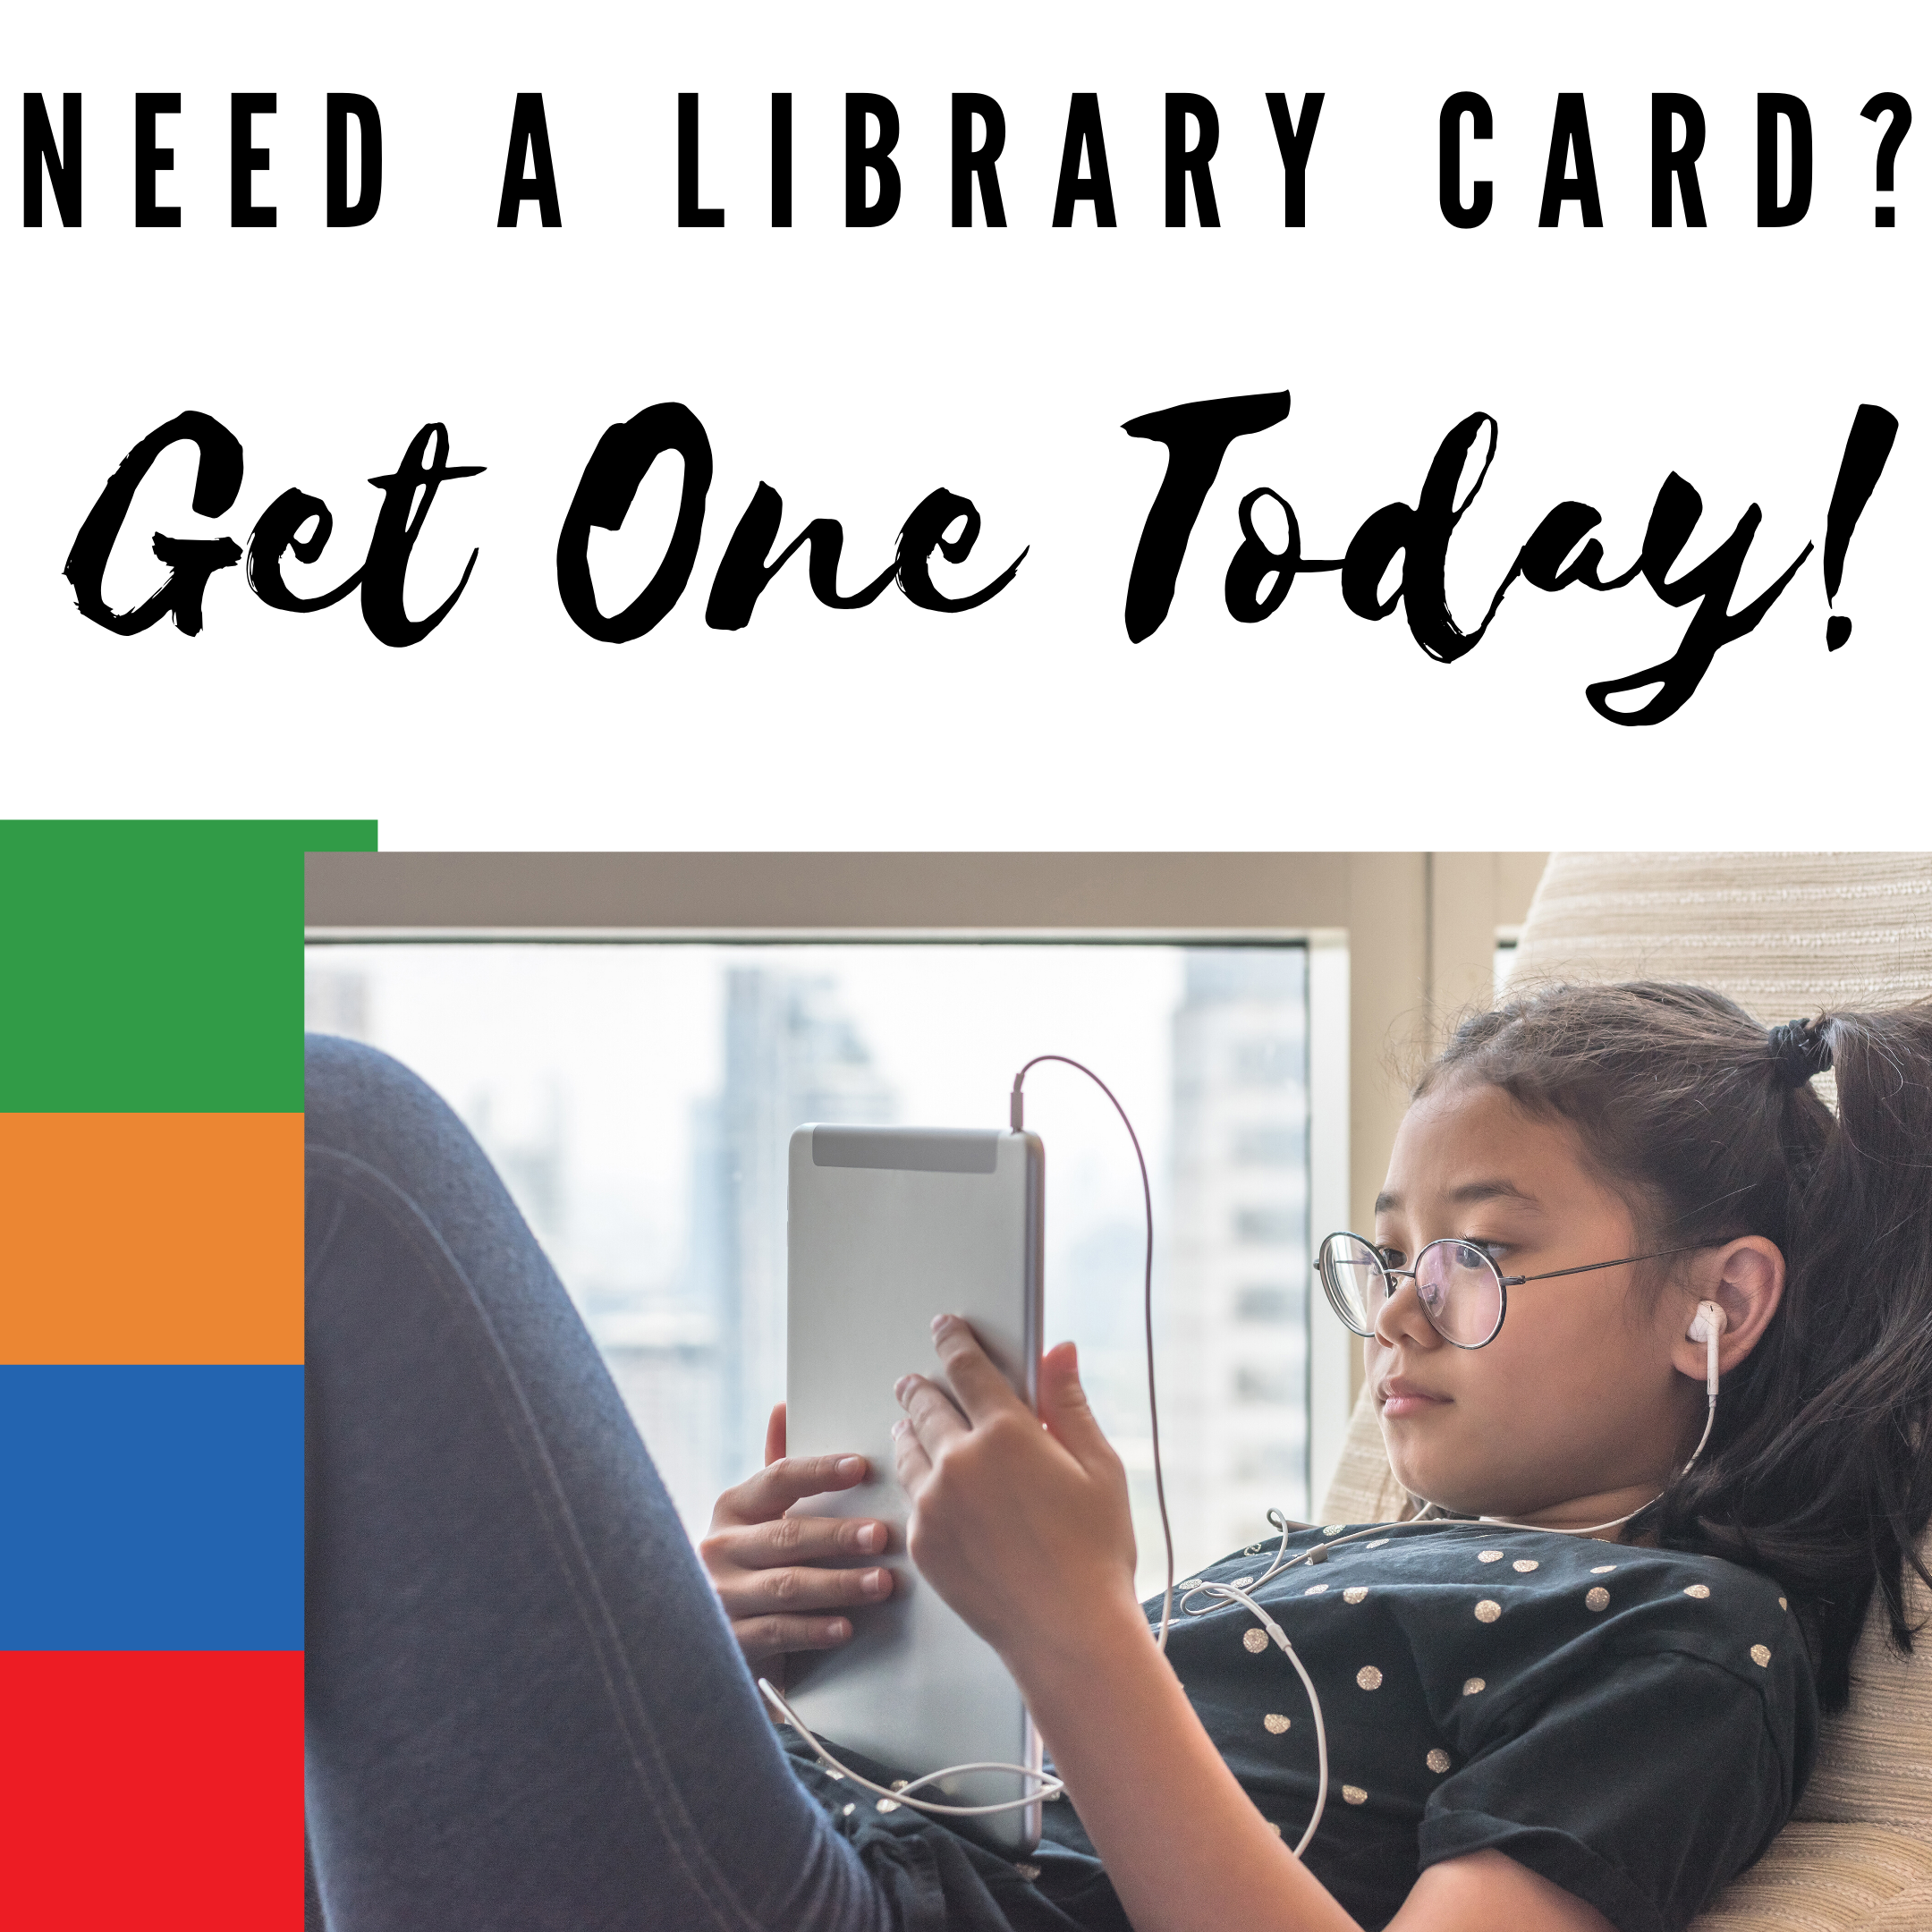 Can I Print Something At The Library Without A Library Card